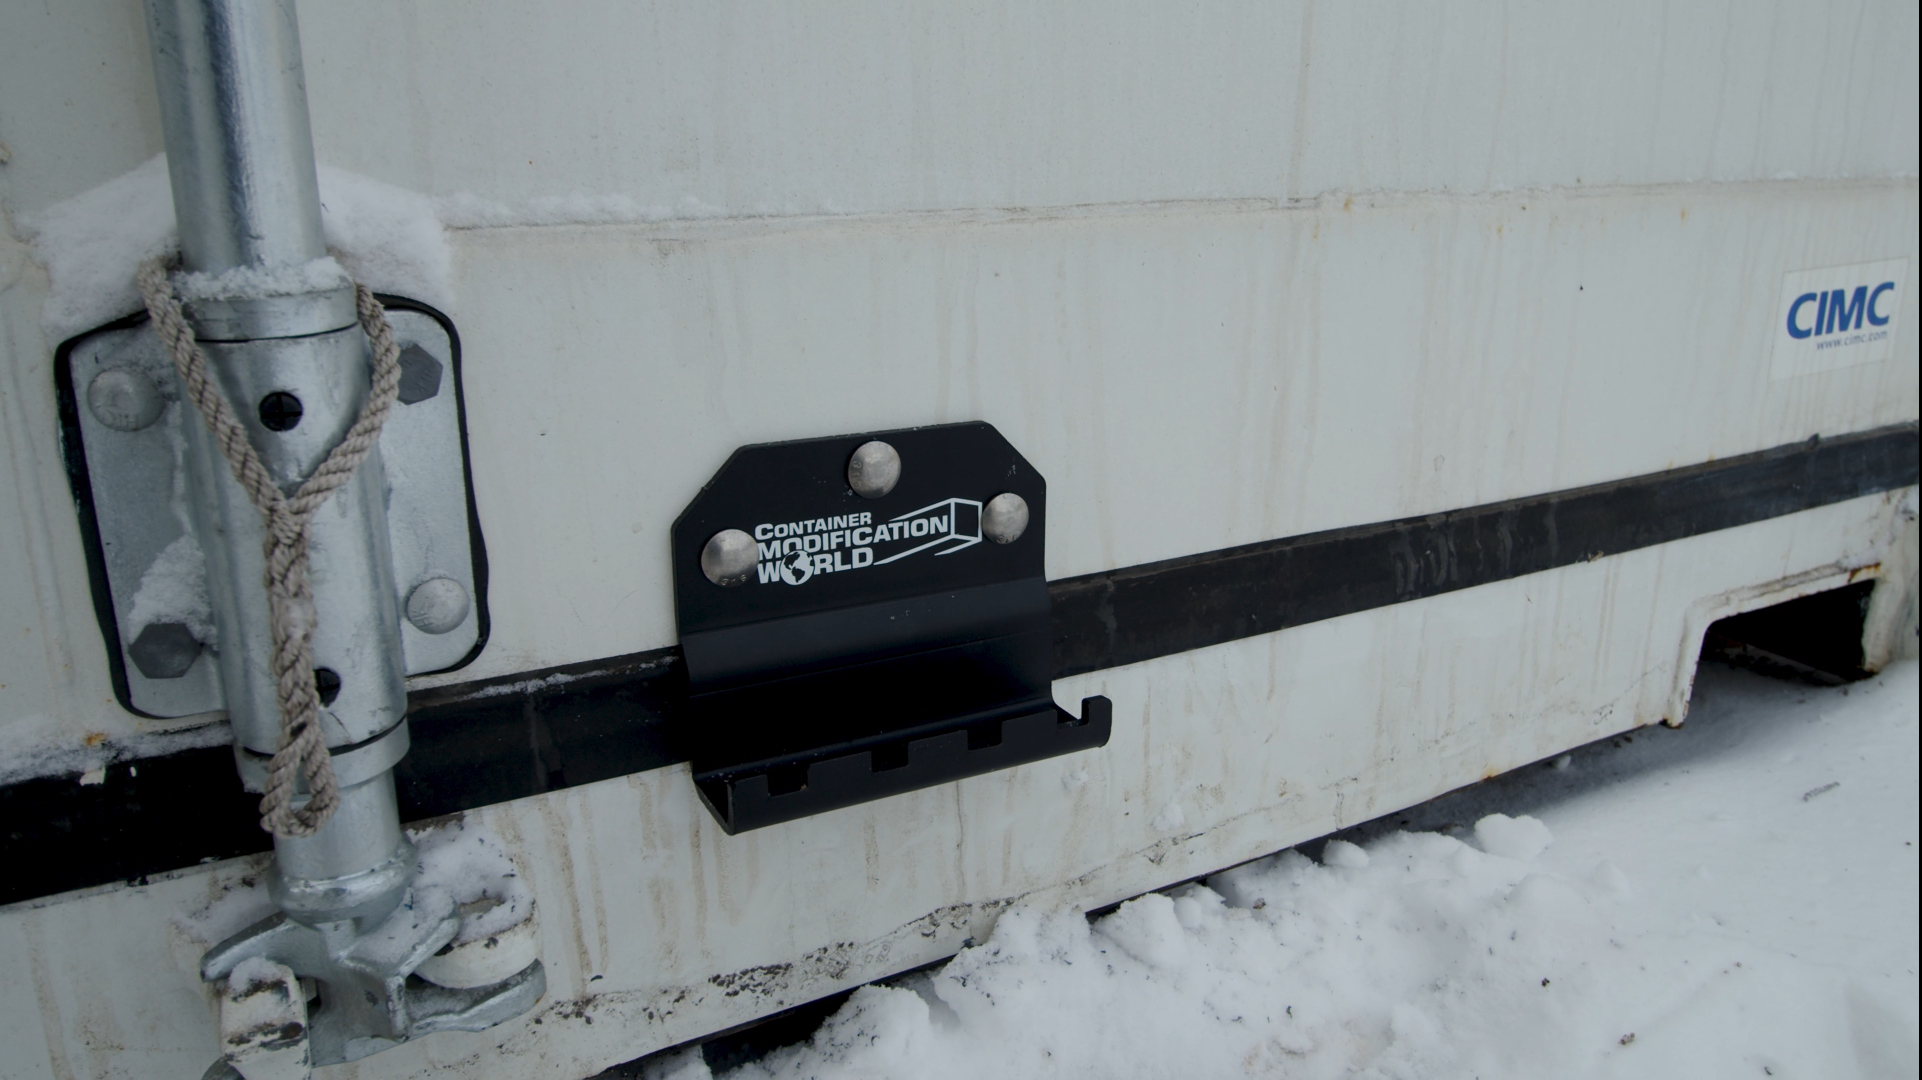 Kick 'N' Close Kick Plate for Shipping Containers/Sea Cans (Protects Your Door Seals)